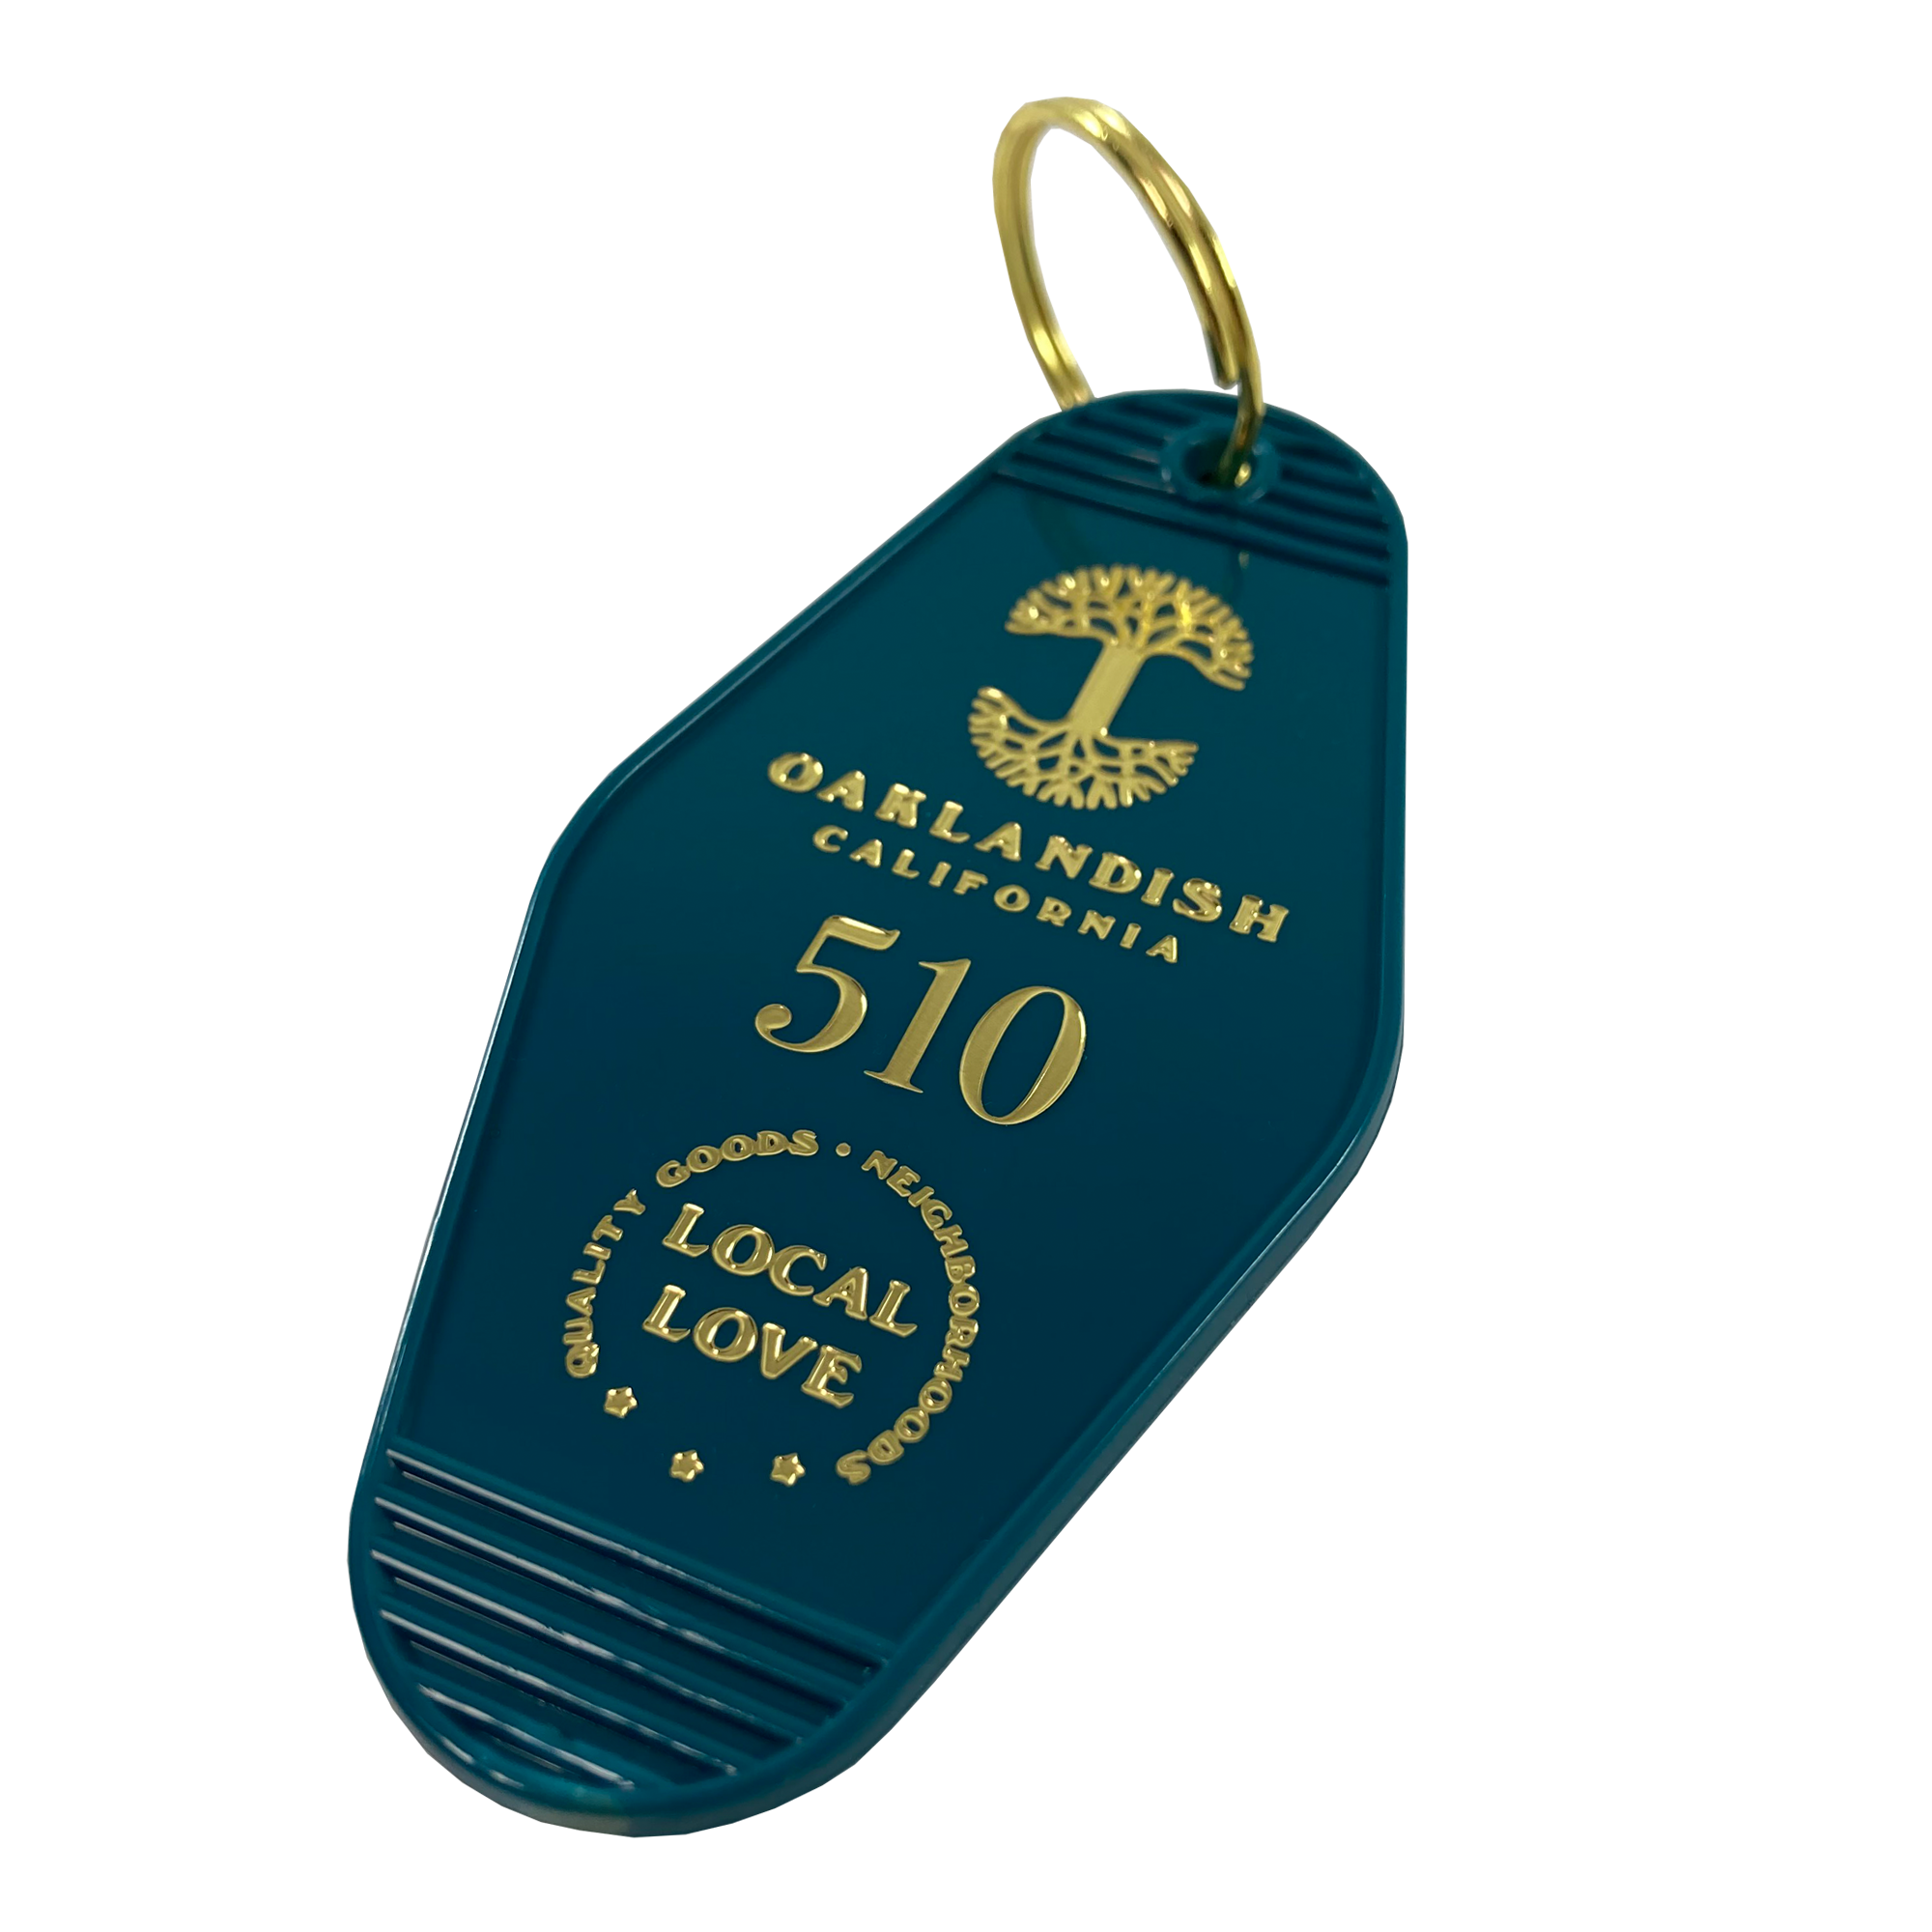 Detailed angle image of blue vintage motel-style keychain with gold Oaklandish Logo and wordmark and 510 local love logo.